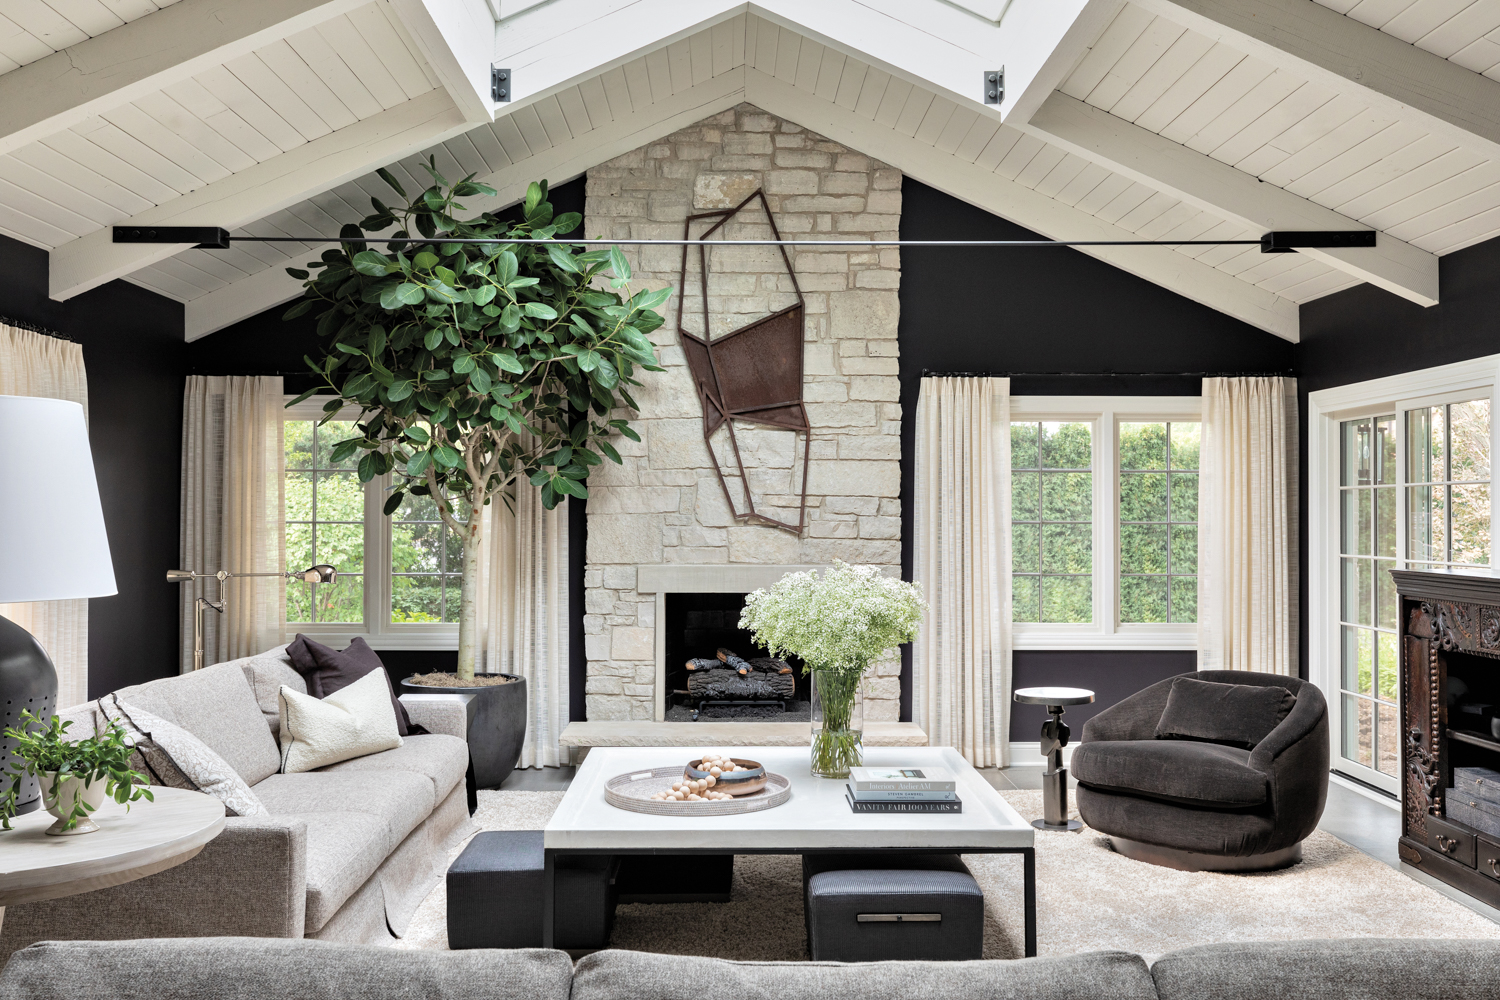 Great room with black walls, white vaulted ceiling, gray upholstered furnishings and a stone fireplace.